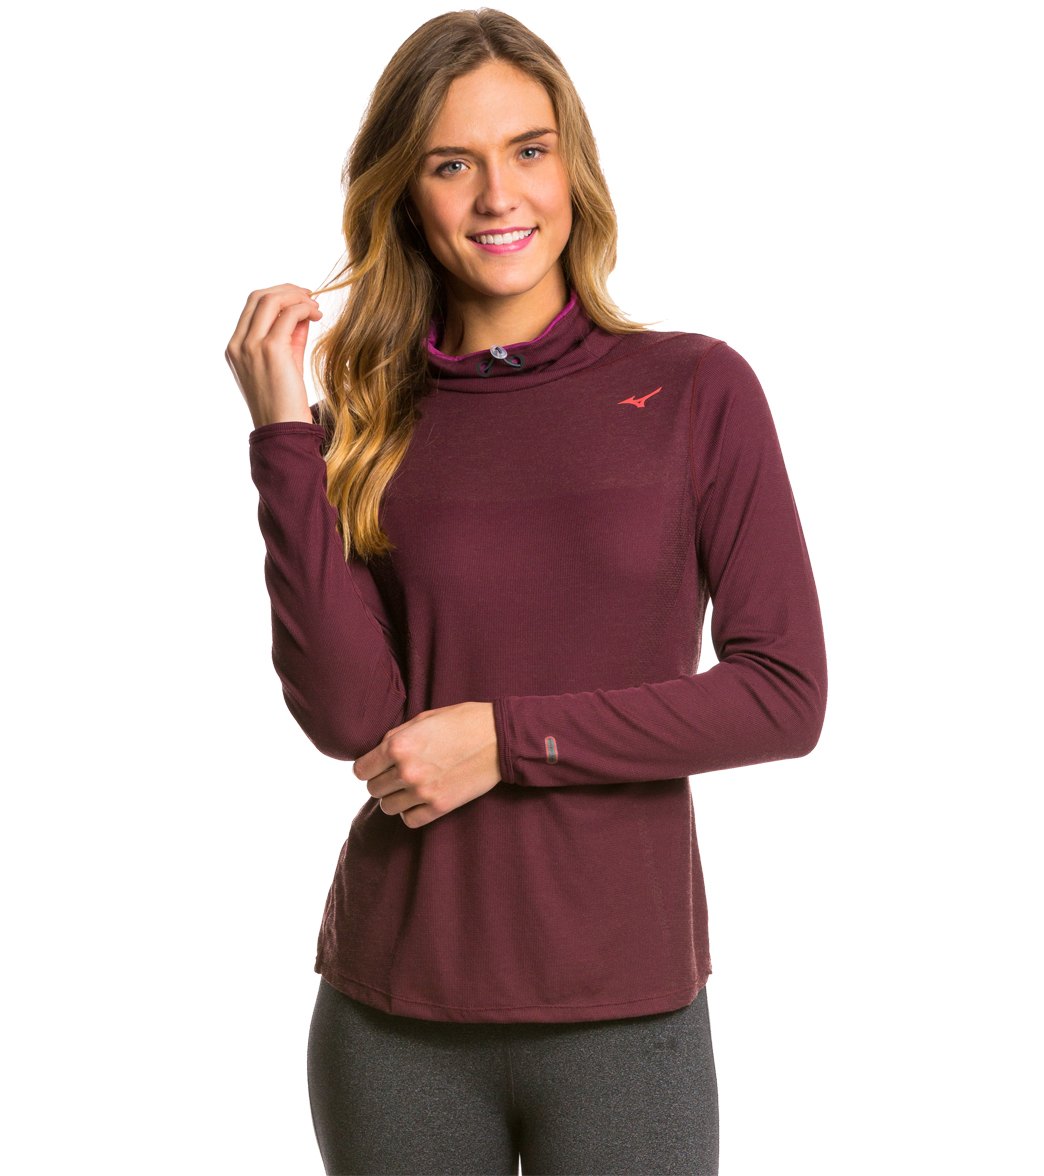 Mizuno Women's Breath Thermo Body Mapping Cowl Long Sleeve Shirt - Fig/Cayenne Small - Swimoutlet.com